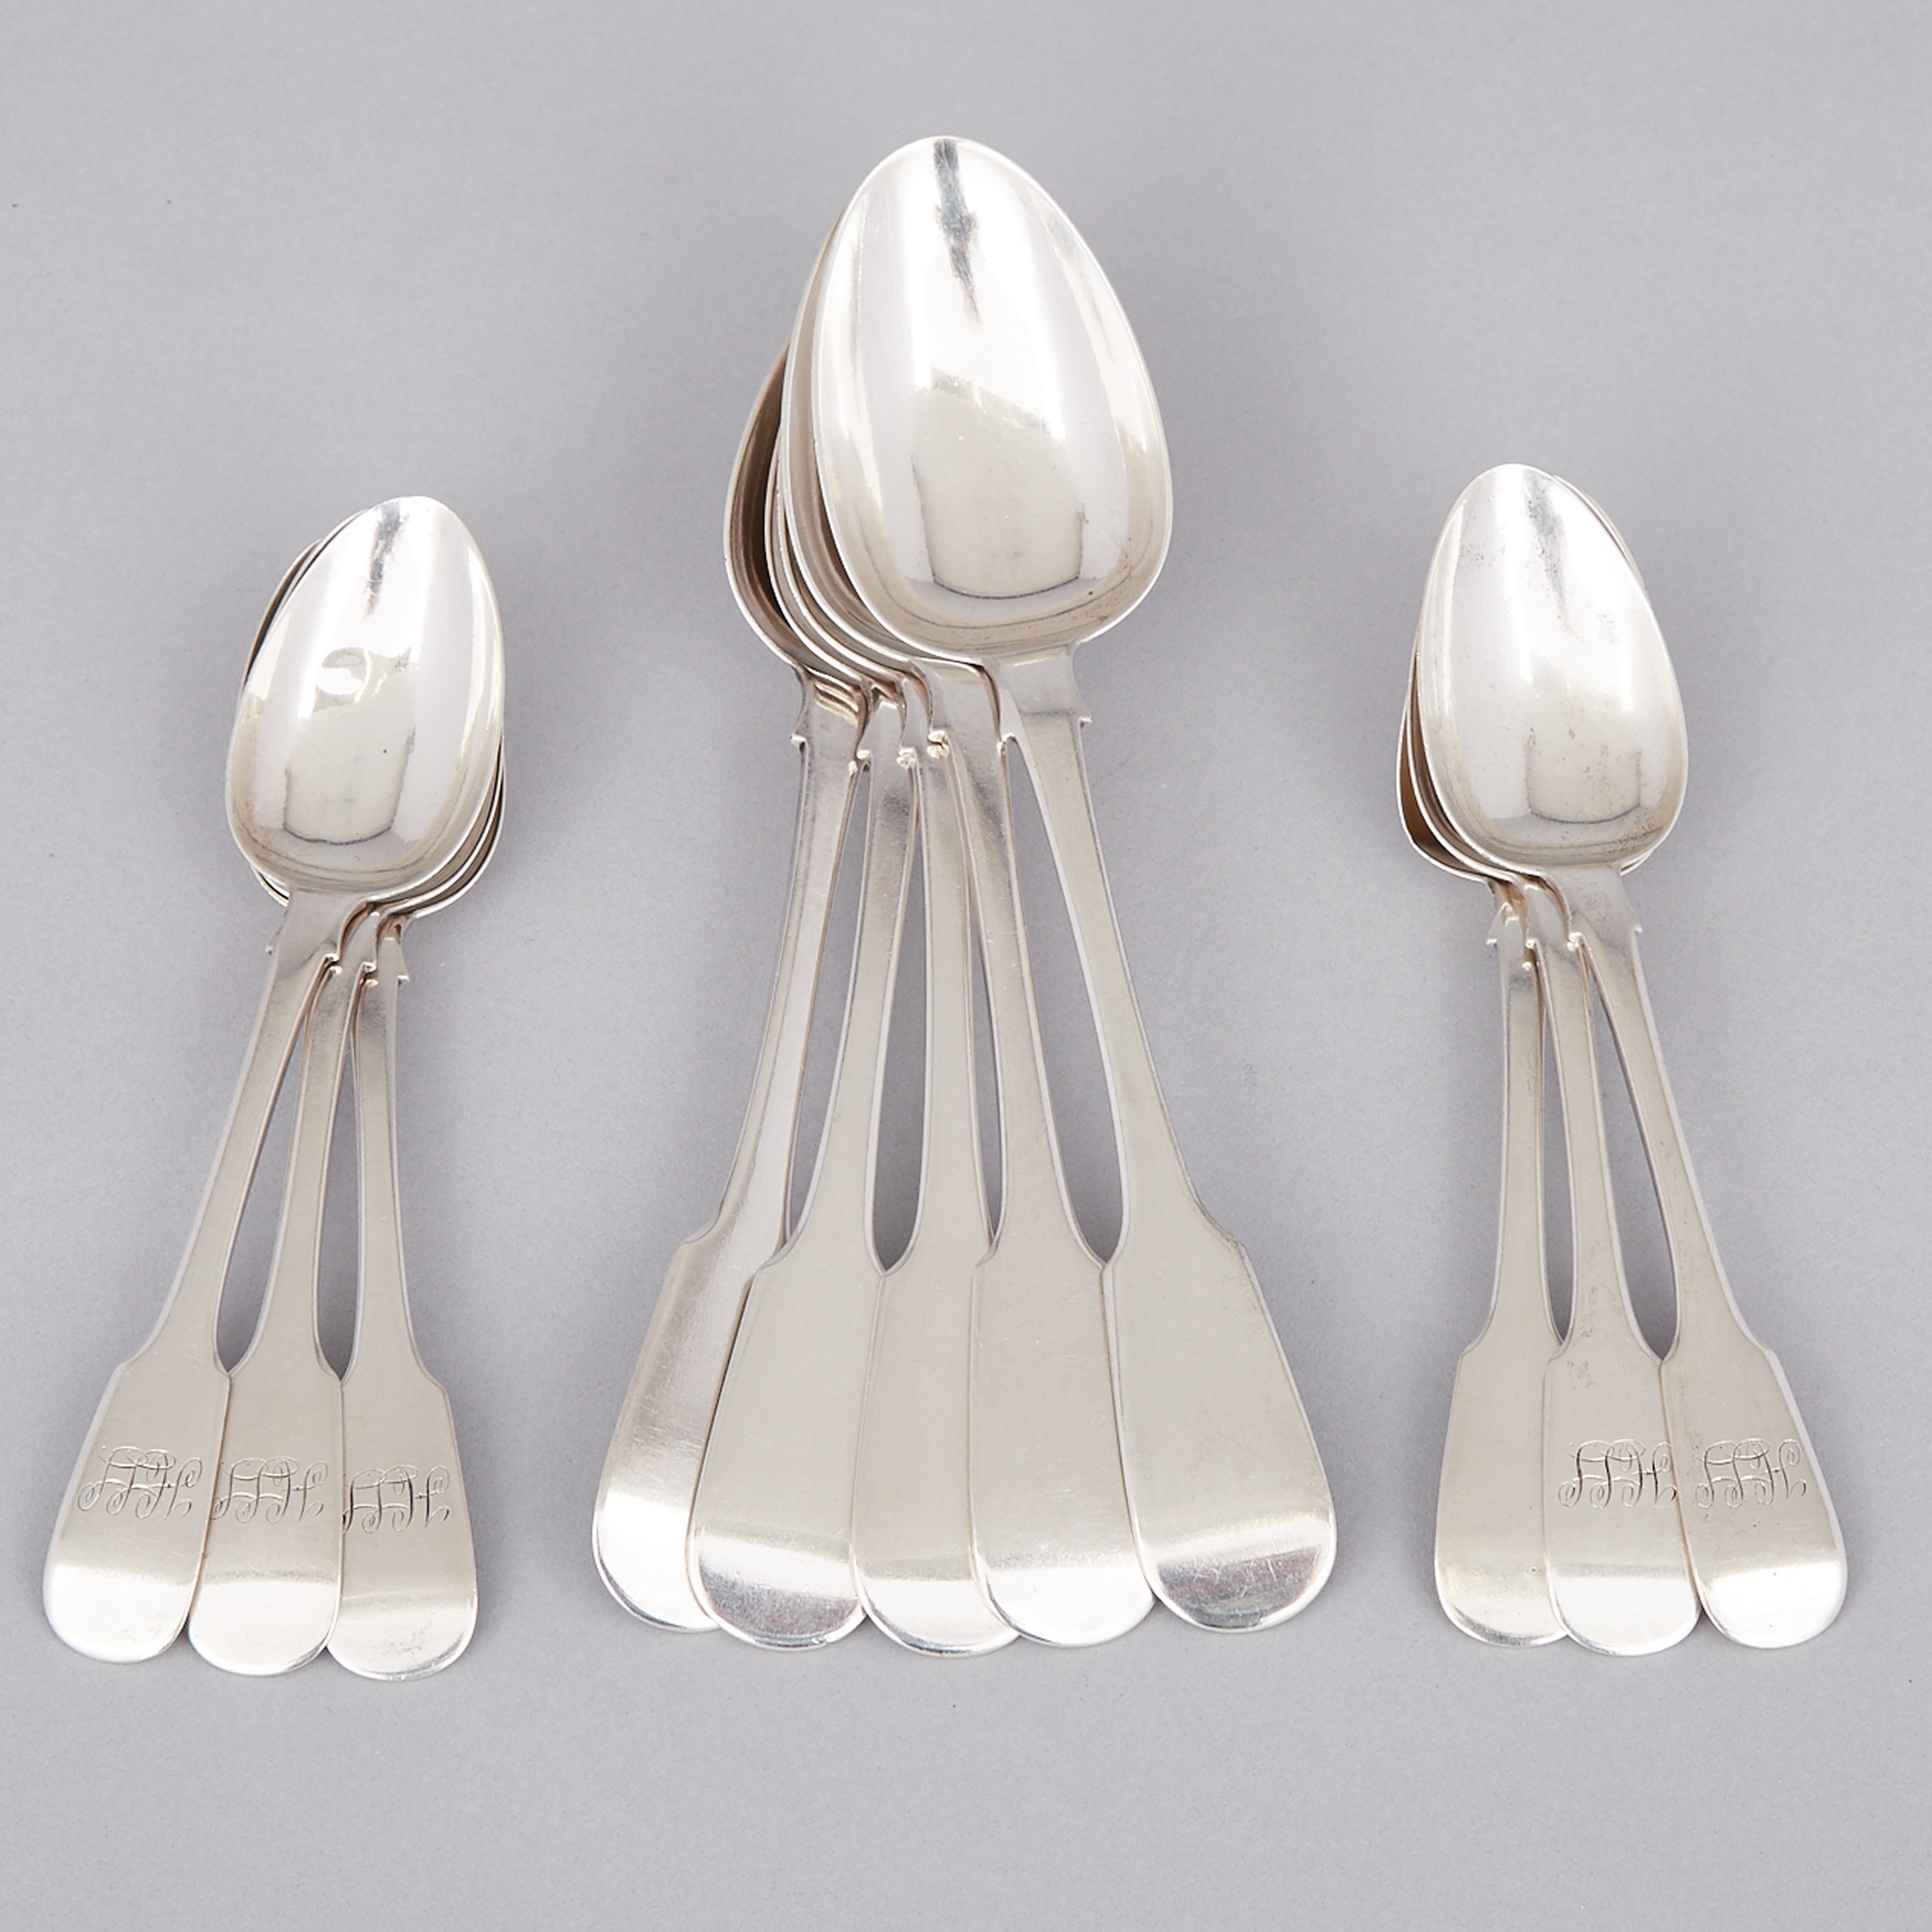 Five Canadian Silver Fiddle Pattern Dessert Spoons and Six Tea Spoons, François Sasseville, Quebec City, Que., mid-19th century 